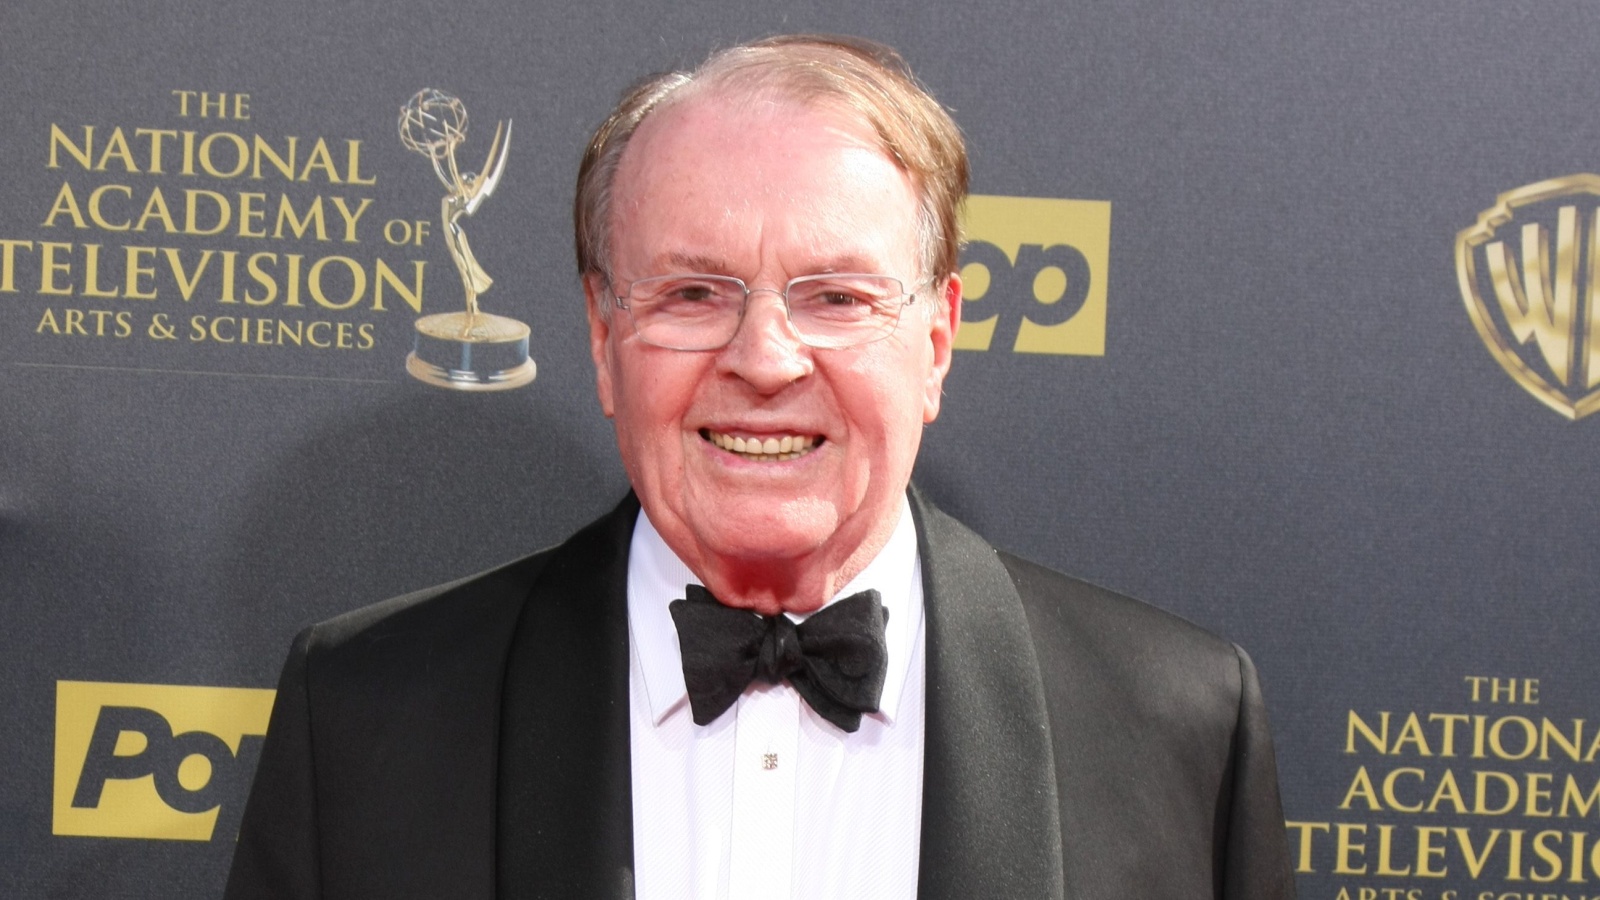 <p><span>Charles Osgood, longtime anchor of <em>CBS Sunday Morning</em>, died on January 23, 2024. He passed away following a battle with dementia. Osgood retired from the show in 2016 after 45 years in service and was 91 years old.</span></p><p><span>Jane Pauley is the current host of <em>CBS Sunday Morning</em> and had the following to say about her colleague: “Watching him at work was a masterclass in communicating. I’ll still think to myself, ‘How would Charlie say it?,’ trying to capture the elusive warmth and intelligence of his voice and delivery.”</span></p><p><a class="theme markdown__link" href="https://www.msn.com/en-us/channel/source/Movie%20Nights/sr-vid-d3yx0j8wg3fdqxaqdfi2763g5nci5pve998s6wqpatsfh409wnvs" rel="noopener noreferrer">Follow us on MSN to see more of our exclusive entertainment content.</a></p>